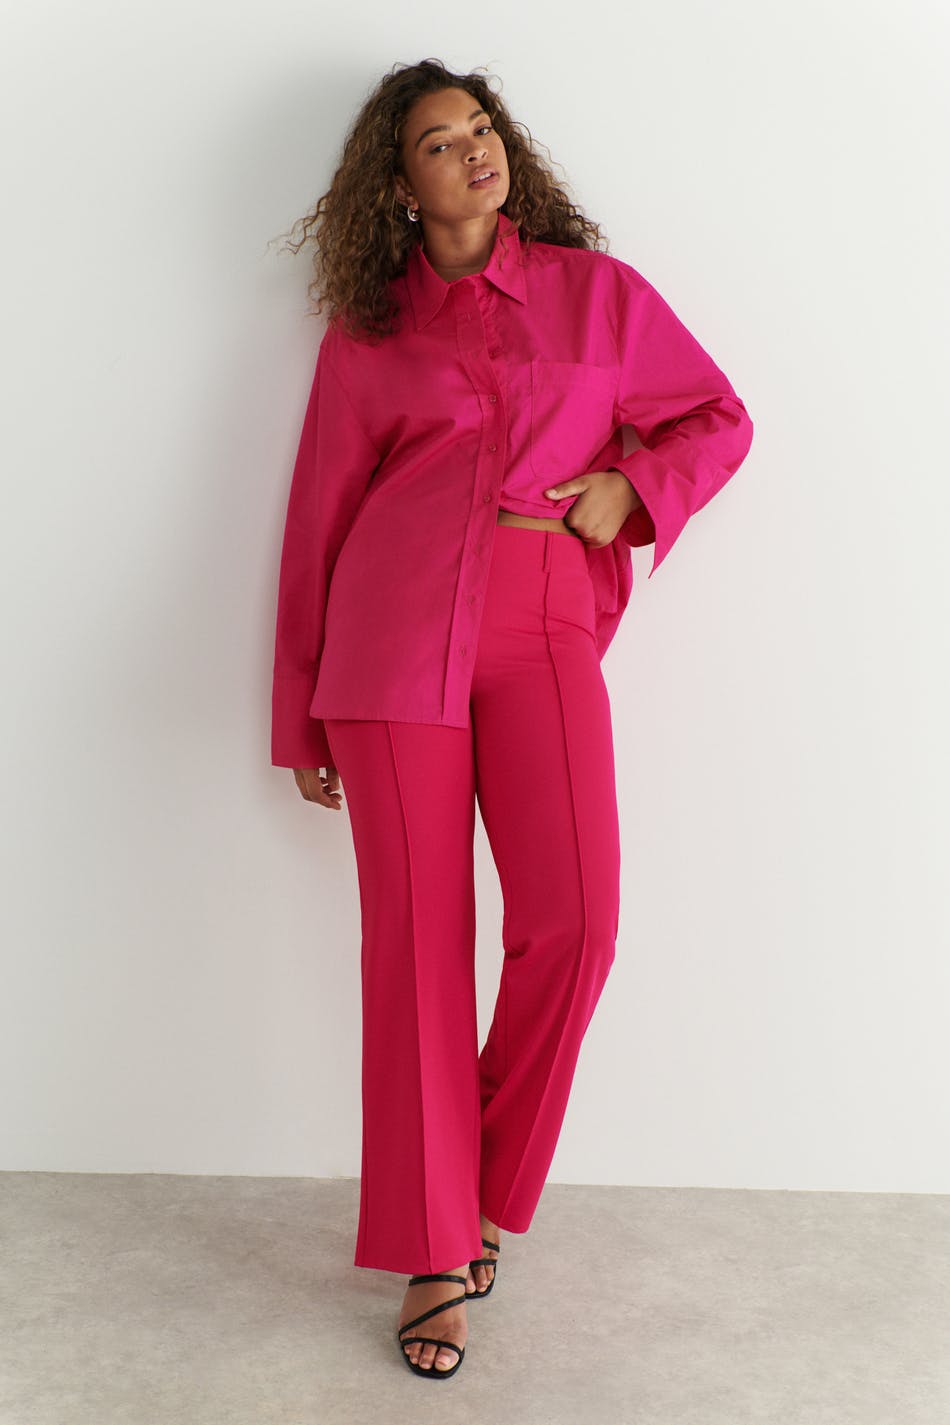 EF x Wyse Tailored Suit Trouser - Rose Pink